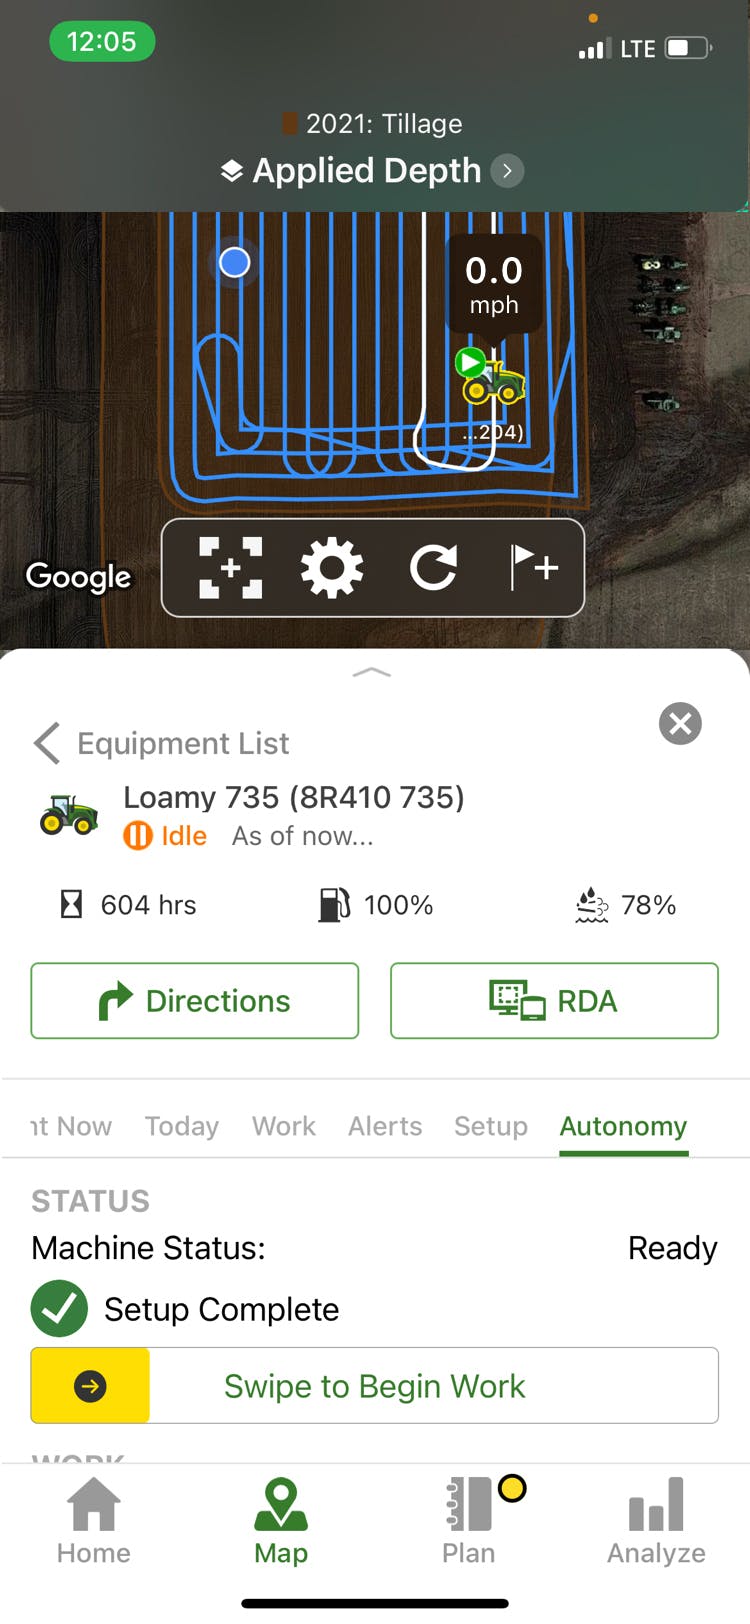 FIGURE 2. A new John Deere autonomous tractor can be operated in part with a smartphone app.